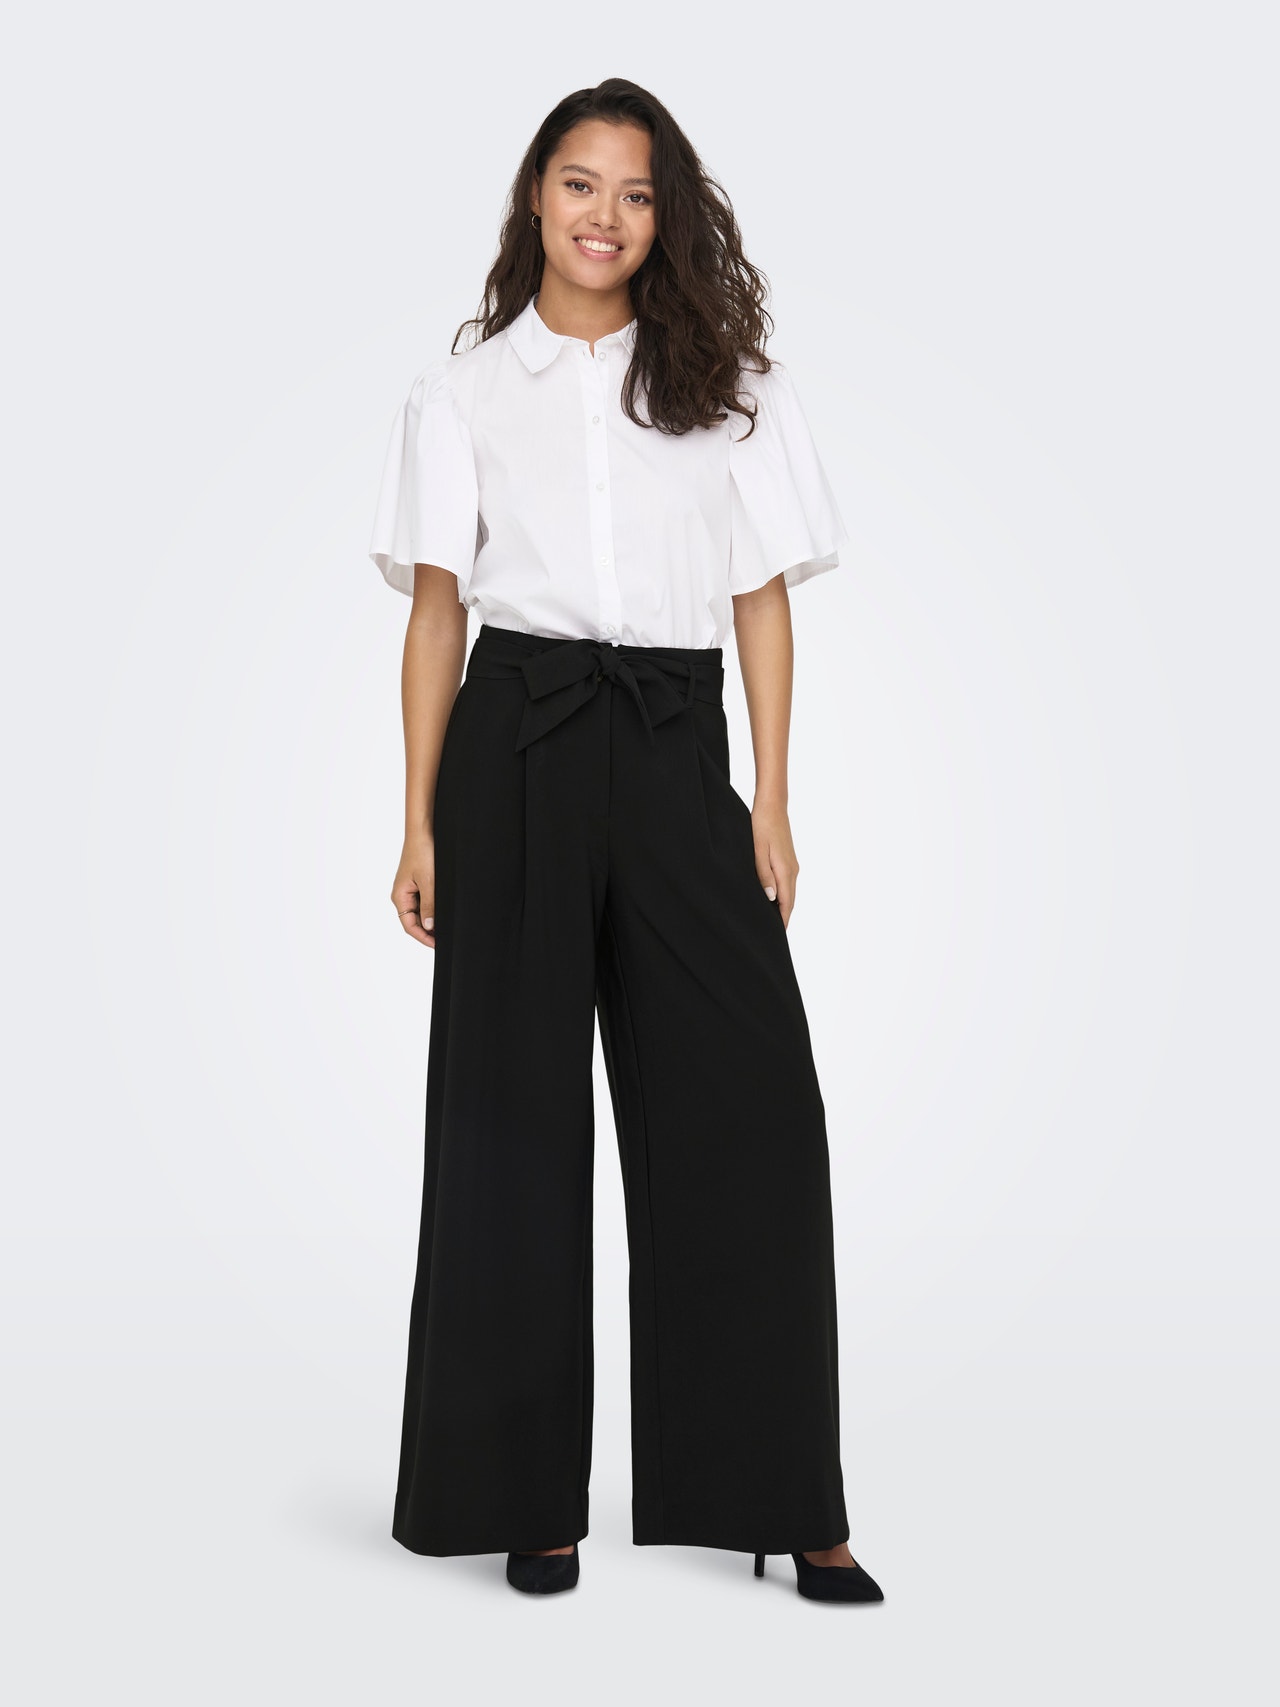 ONLY High Waisted Wide Pants With Belt -Black - 15286399